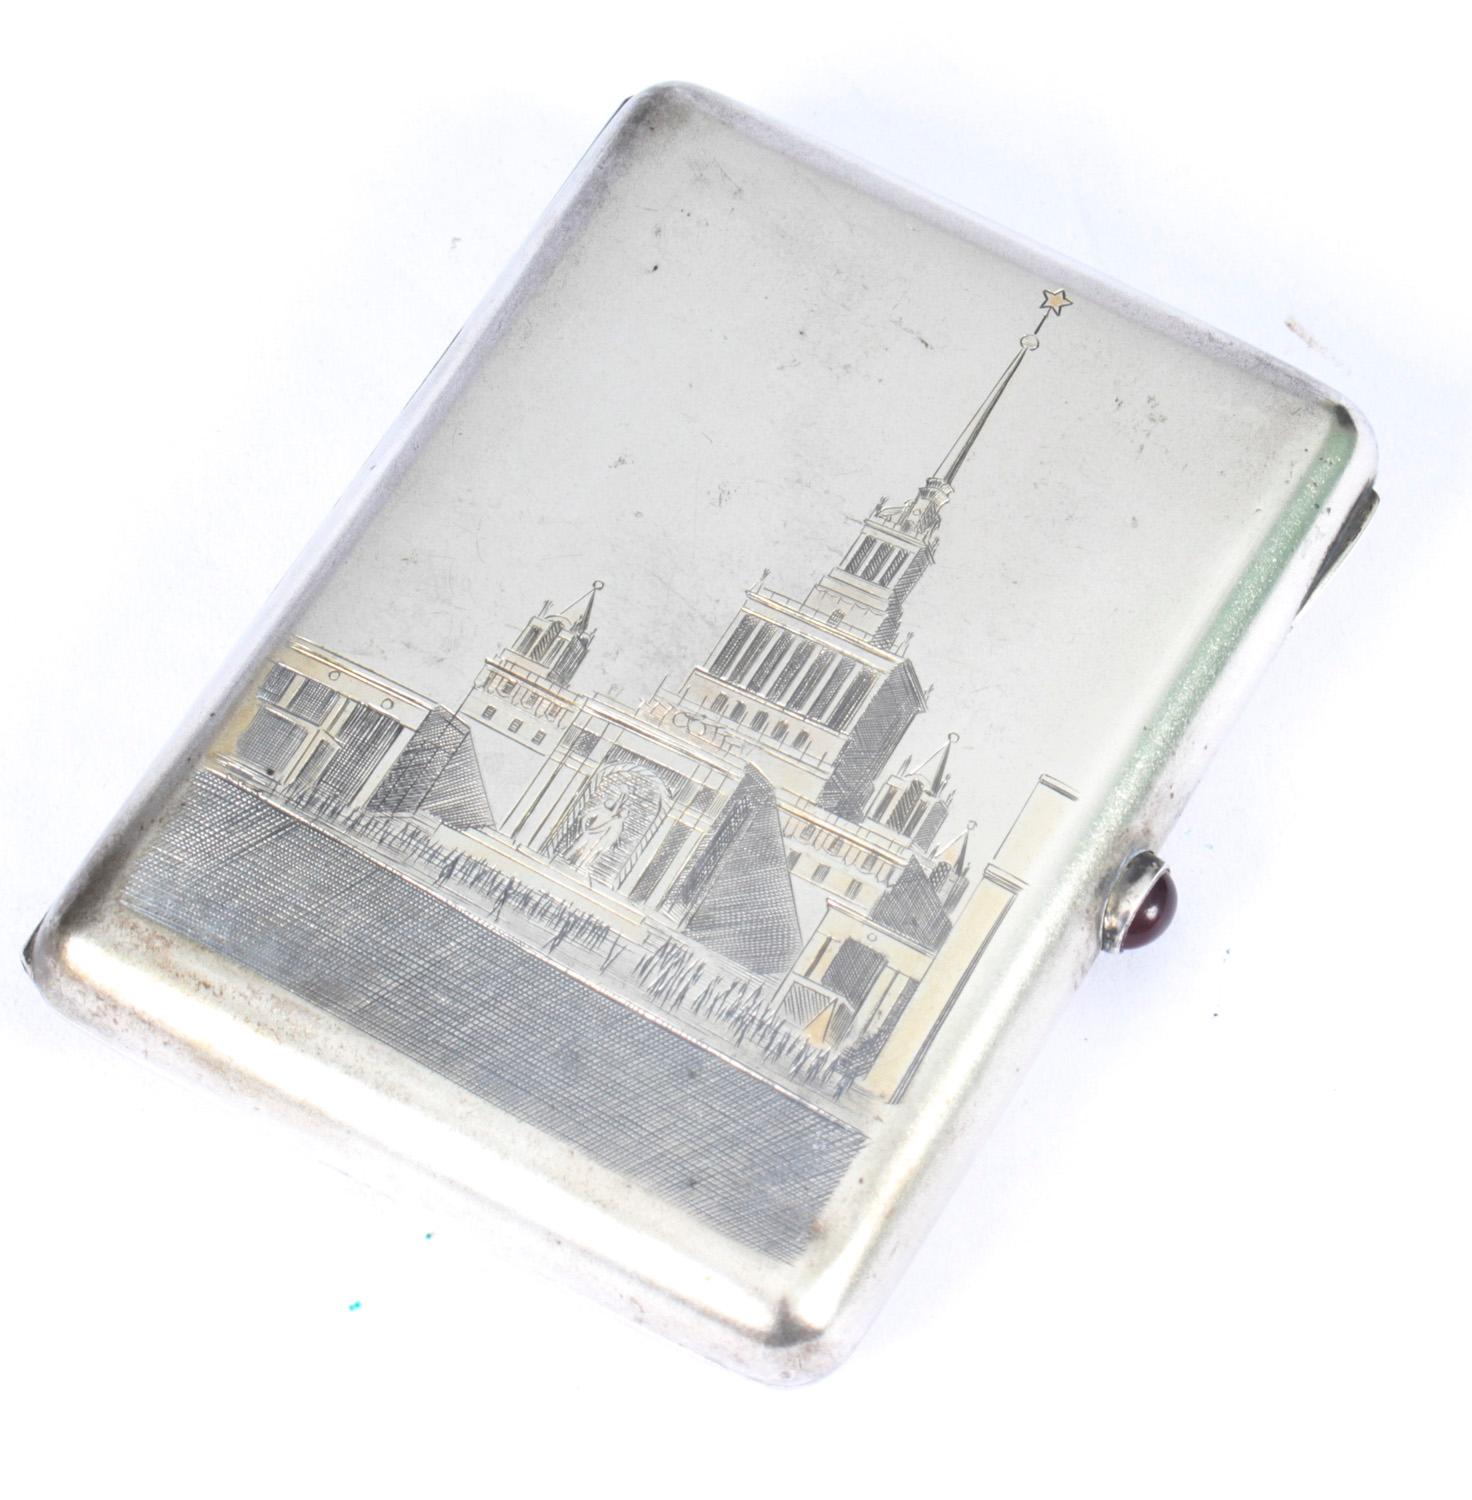 This is an exquisite mid 20th century Russian silver and niello rounded rectangular cigarette case, the cover decorated with Moscow State University, the Communist skyscraper surmounted by a Soviet star, with a ruby cabochon push-button mechanism,